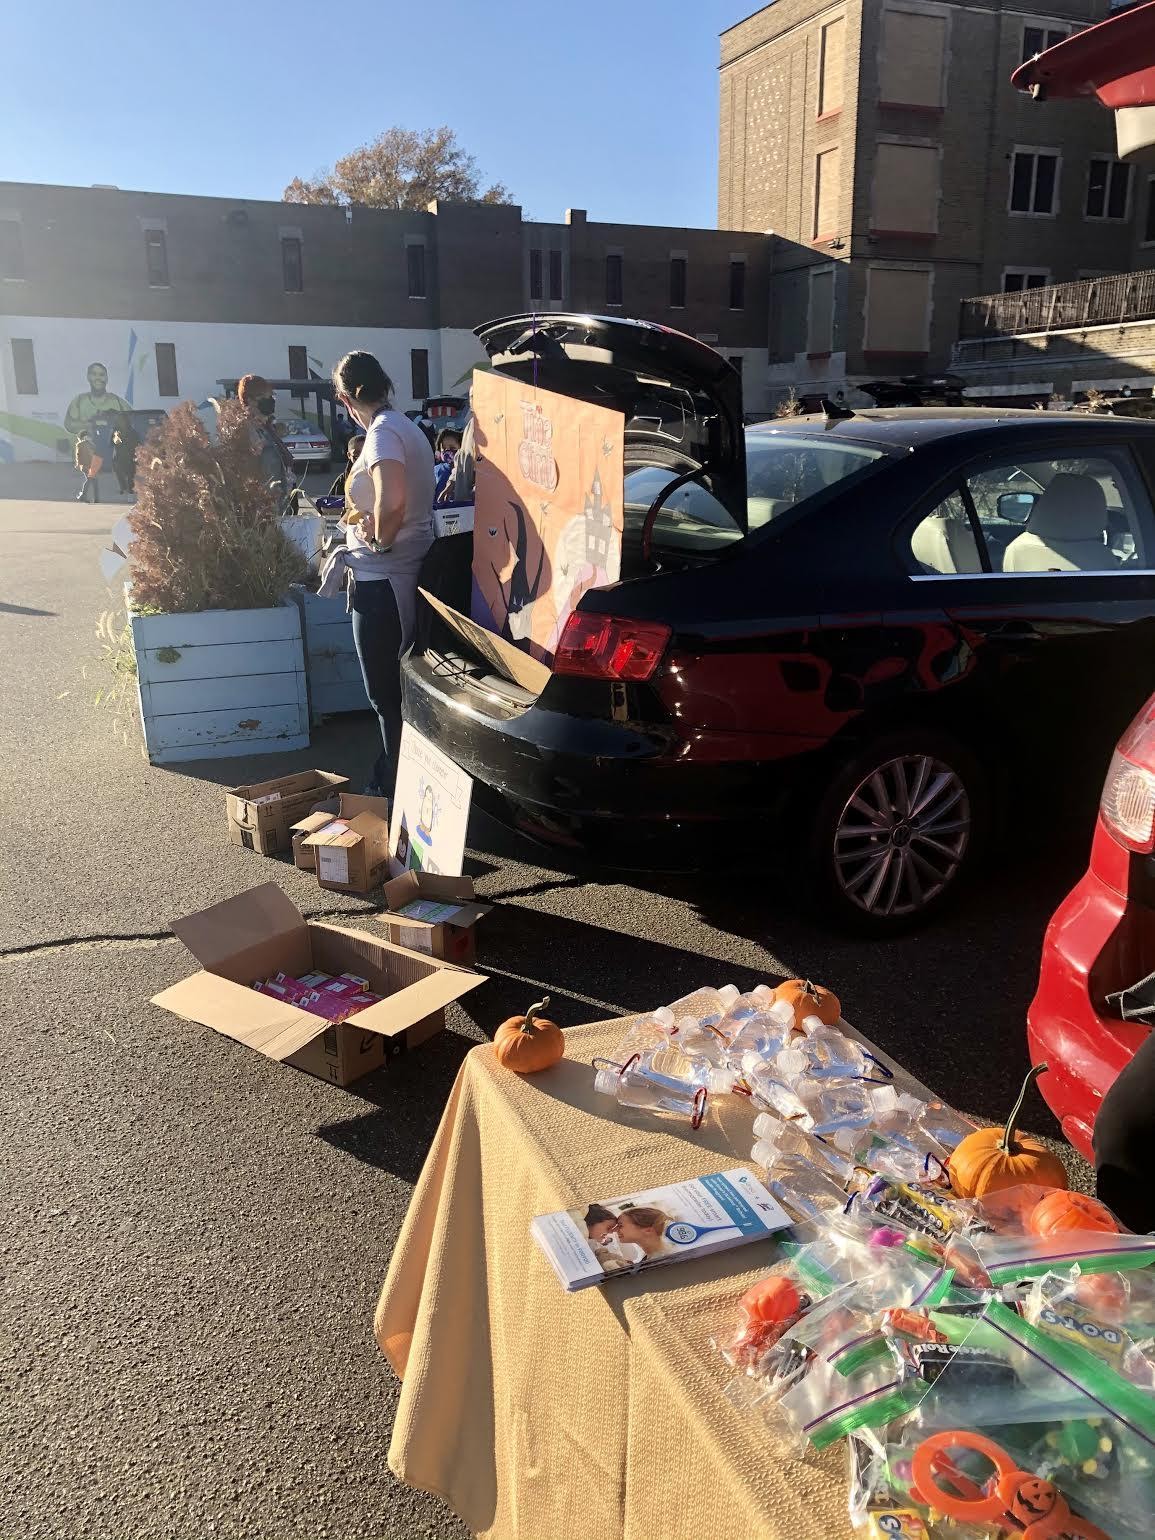 “Trunk or Treat” event earlier this fall at Belmont Charter Elementary School, where I had the opportunity to meet and connect with families.